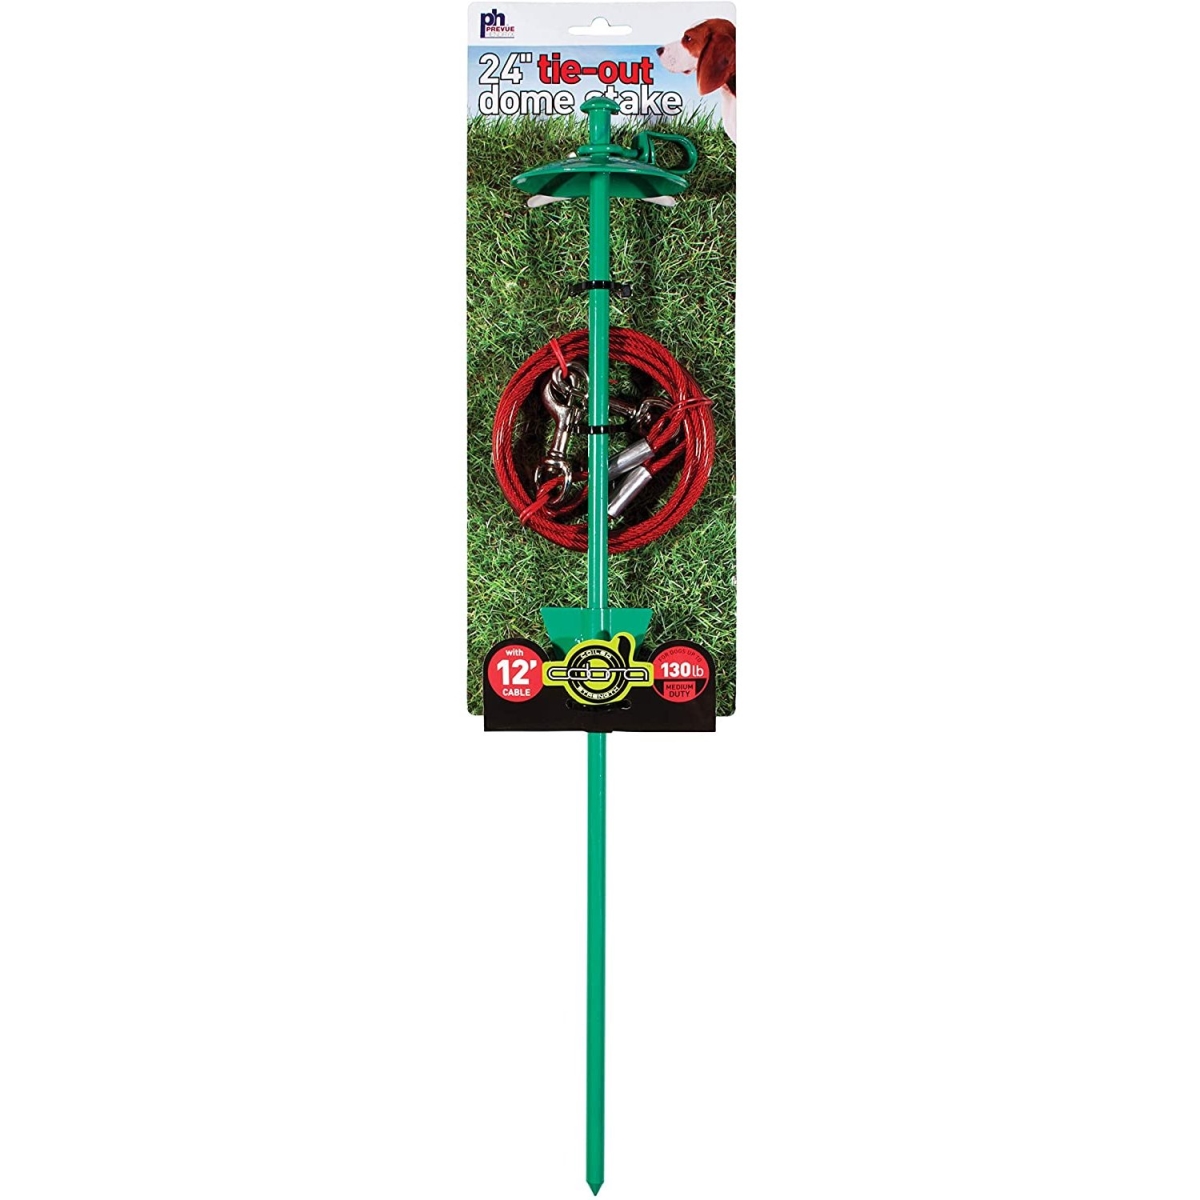 Picture of Prevue Pet Products PP-2123 24 in. Tie-Out Dome Stake with 12 ft. Cable